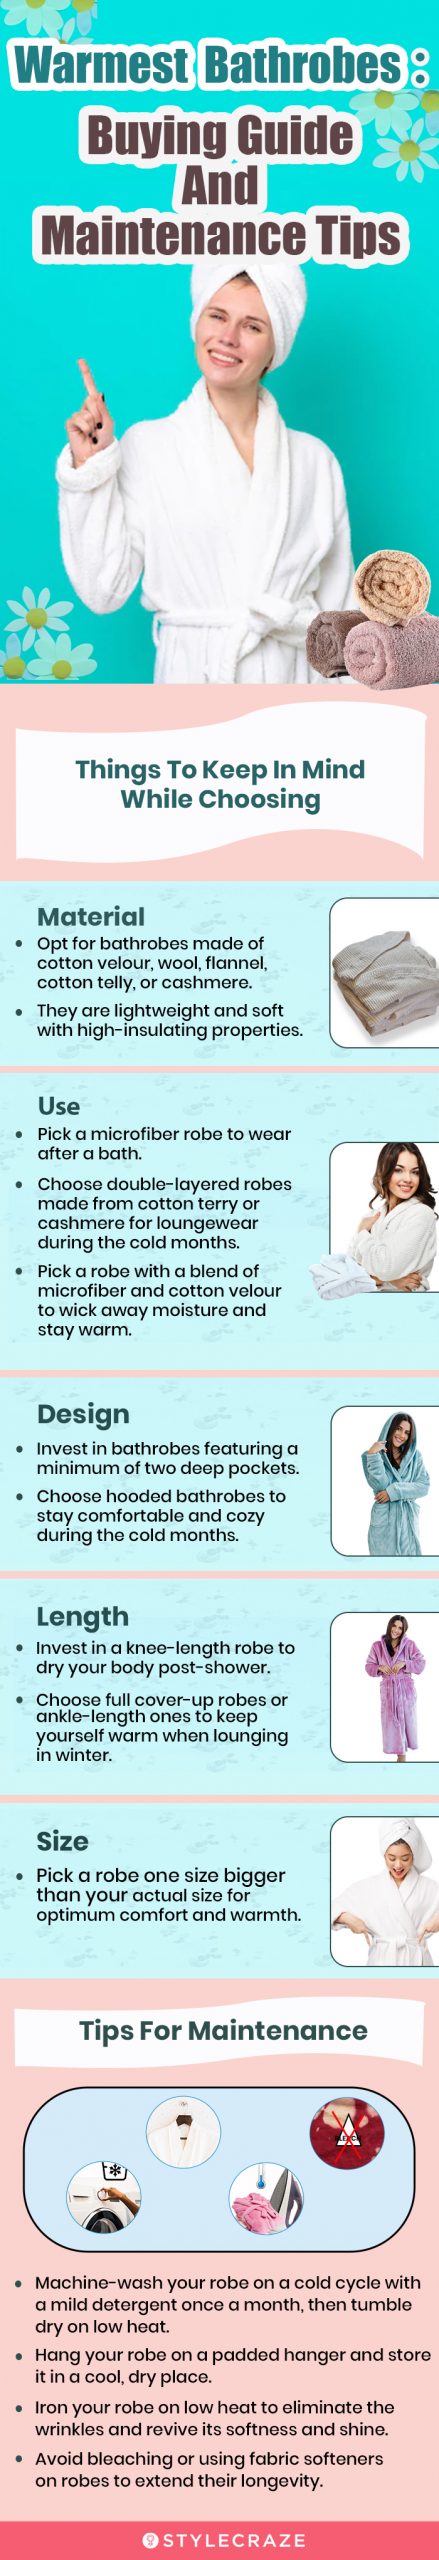 Warmest Bathrobes: Buying Guide And Maintenance Tips (infographic)